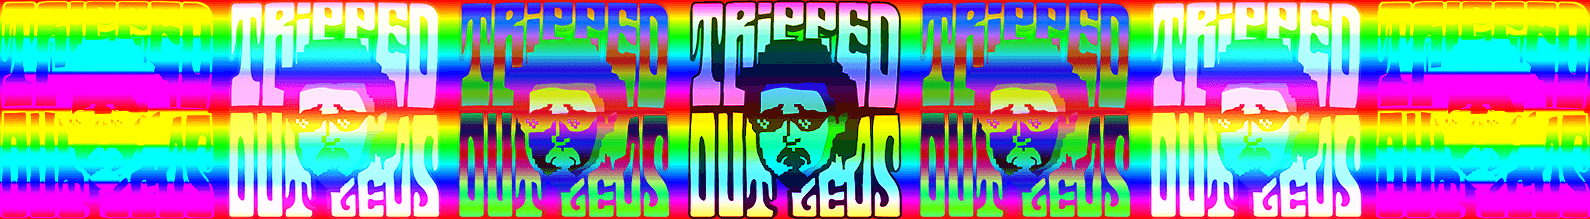 TrippedOutLeos banner